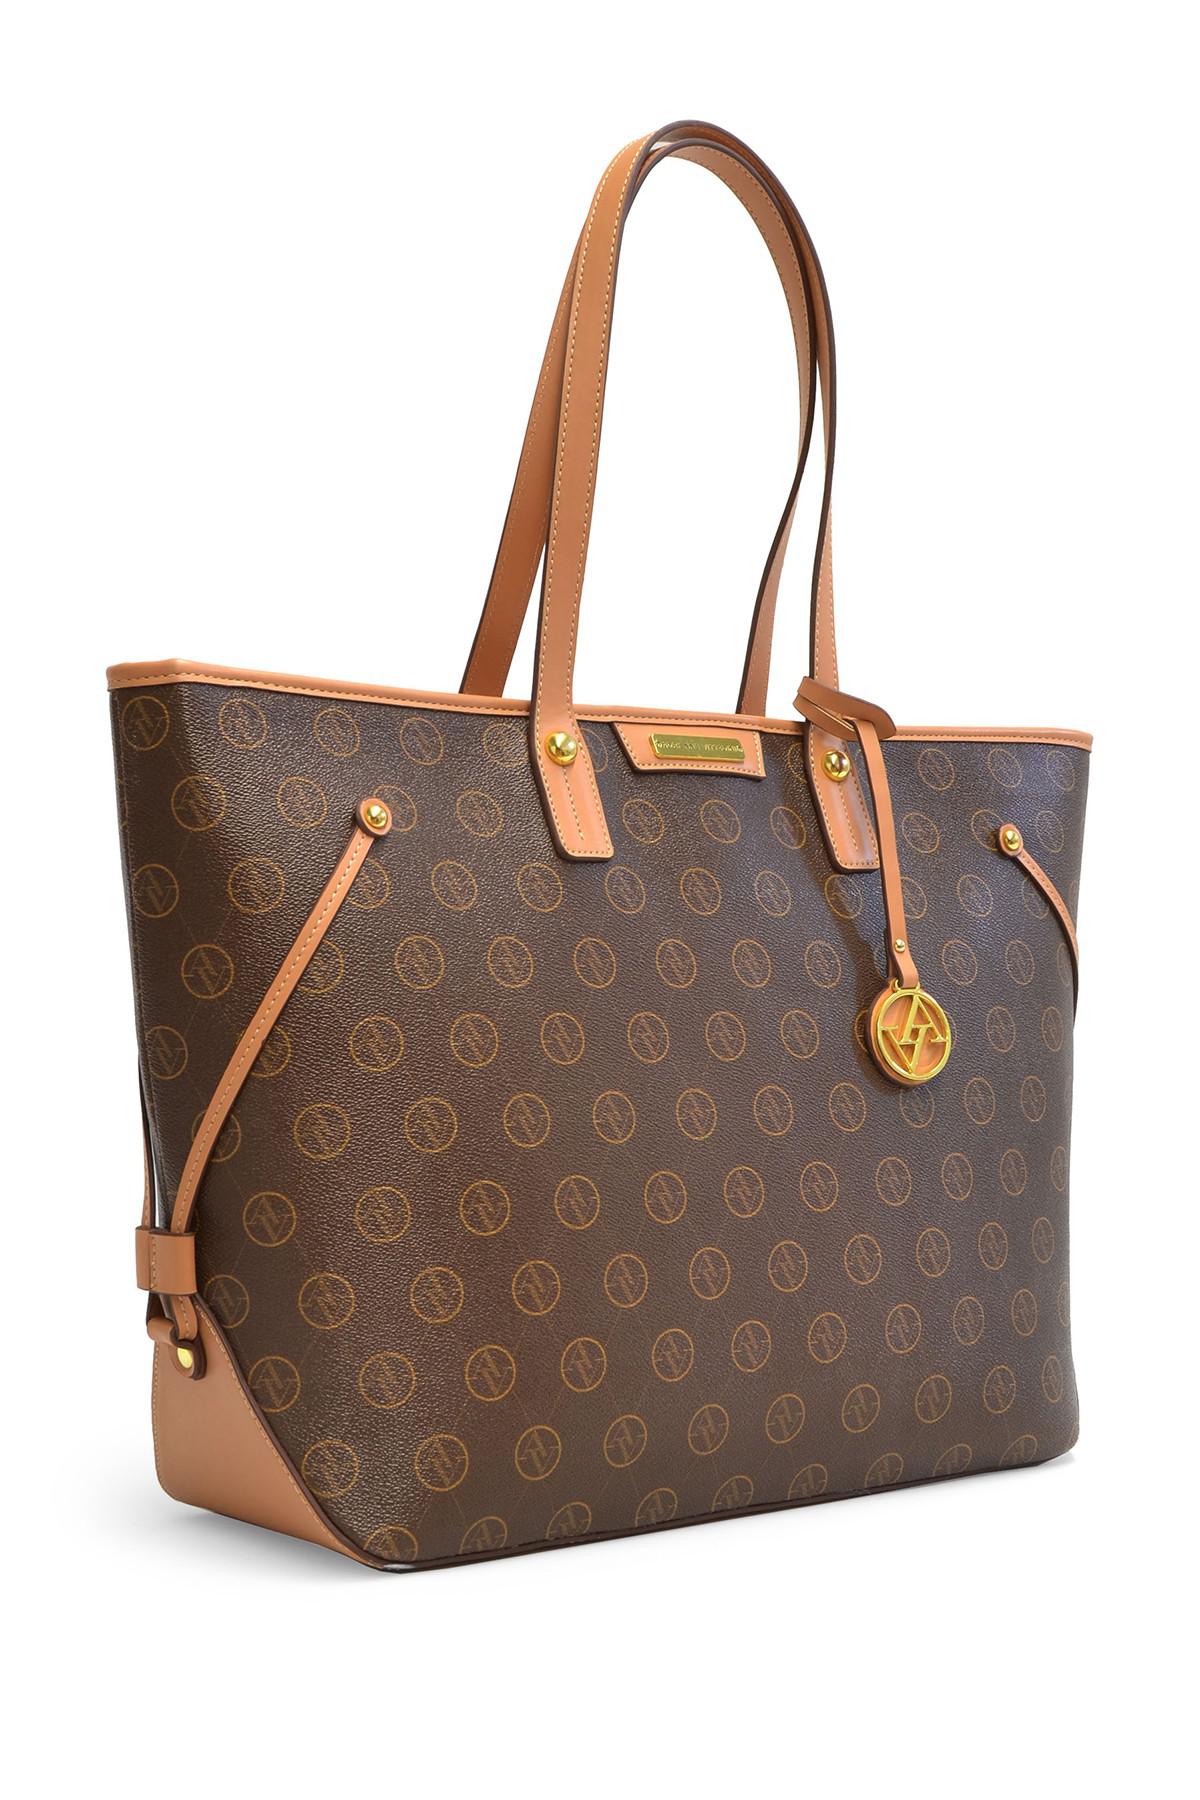 Adrienne Vittadini Large Signature Laptop Tote in Brown | Lyst